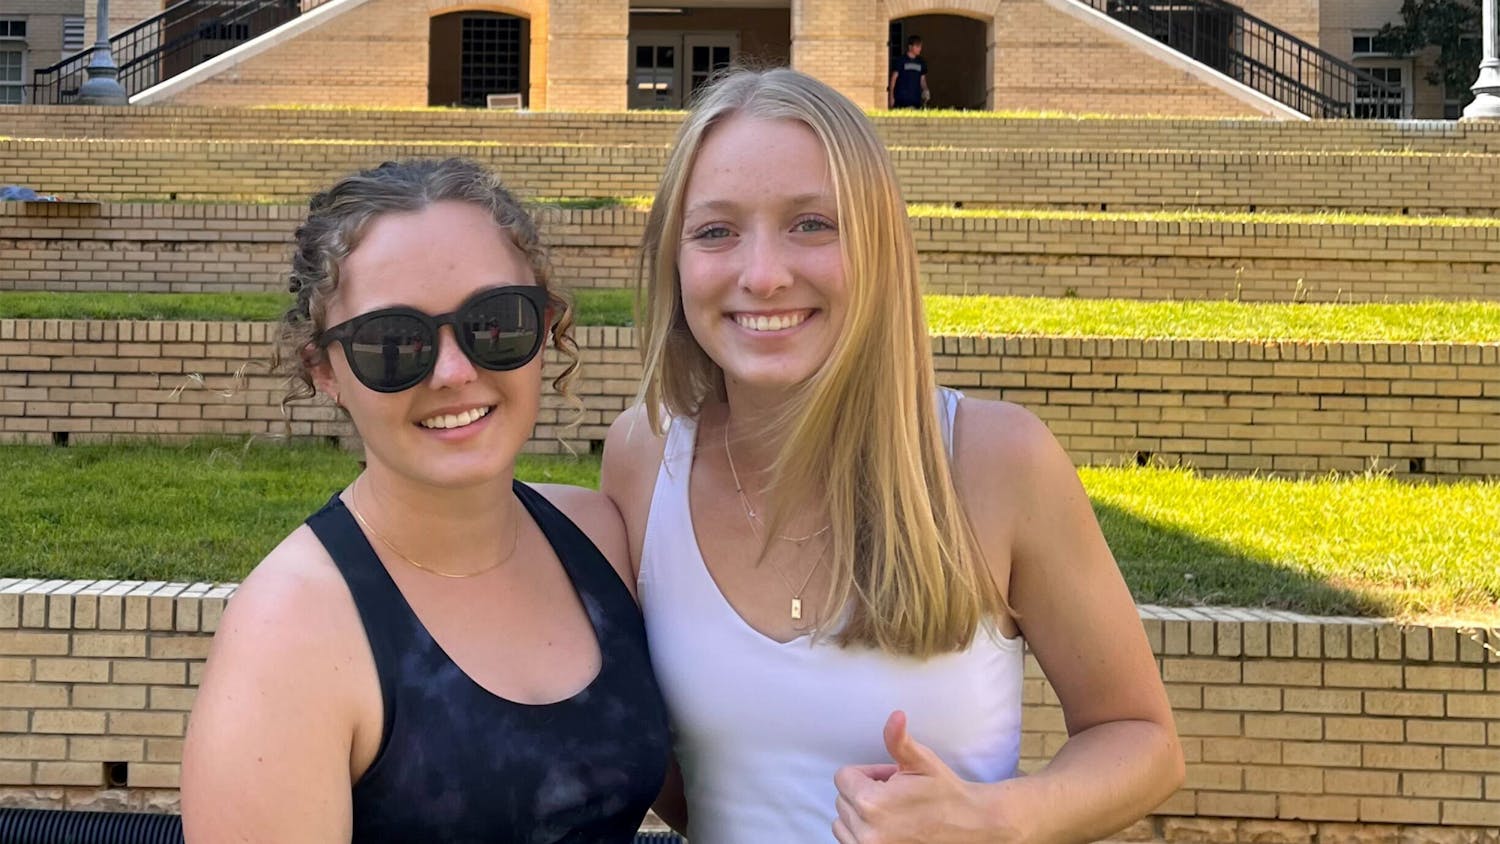 Kailey Cota (left) poses for a picture with her sister, Riley Cota (right), in front of USC’s Green Quad on Aug. 14, 2022. The class of 2026 moved in and prepared to make Columbia feel like home.